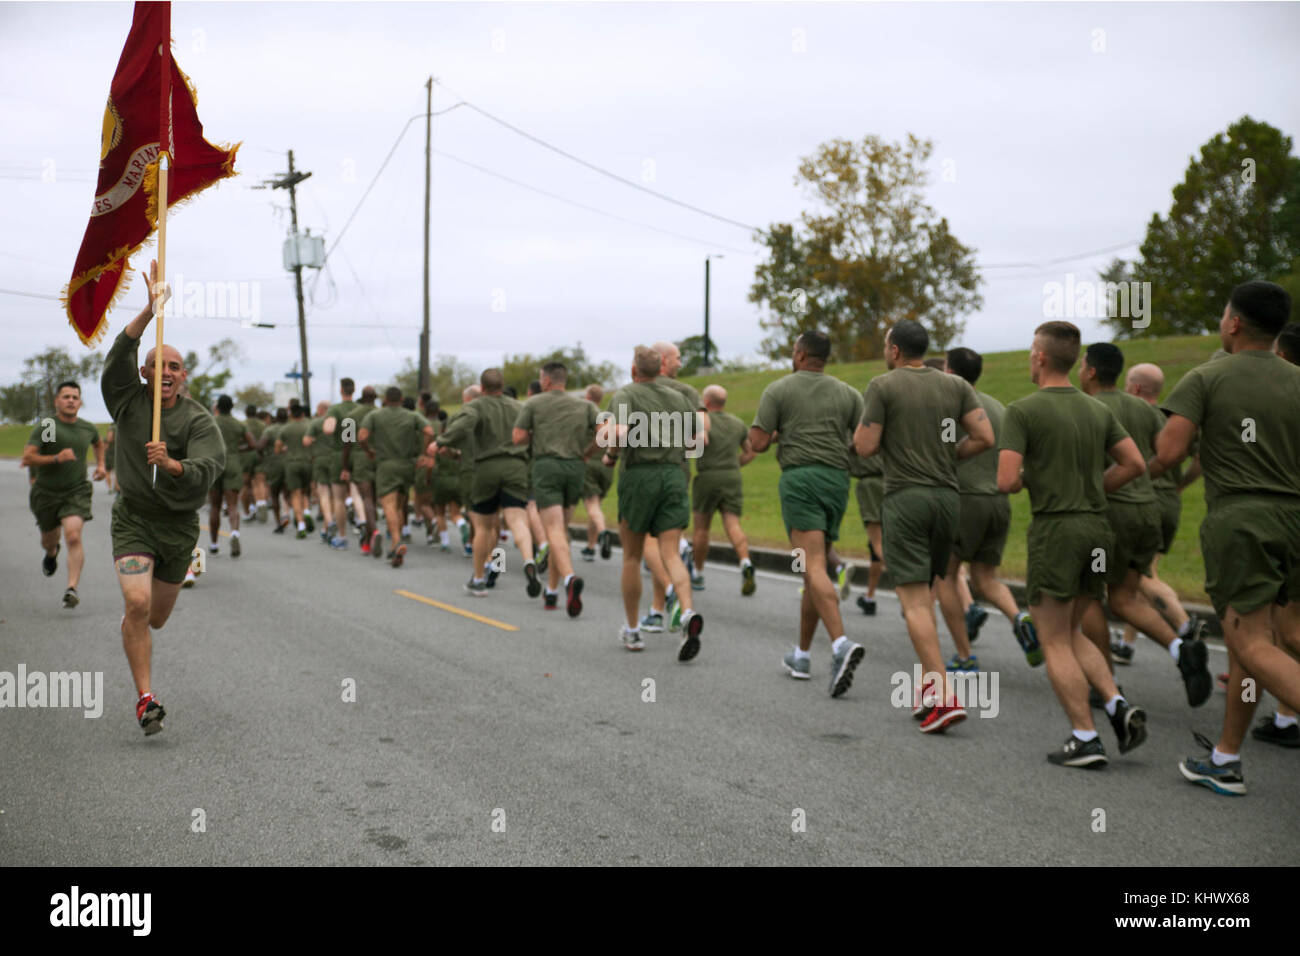 Cpl. Rosember Gloria, a maintenance data specialist with 4th Marine Aircraft Wing, Marine Forces Reserve, runs with a guide-on, alongside Marines from multiple MARFORRES units with Marine Corps Support Facility New Orleans, during a motivational run in New Orleans, Nov. 9, 2017. The 3-mile run is held annually to celebrate the Marine Corps birthday, and promote unit cohesion and esprit de corps. (U.S. Marine Corps photo by PFC. Tessa D. Watts) Stock Photo